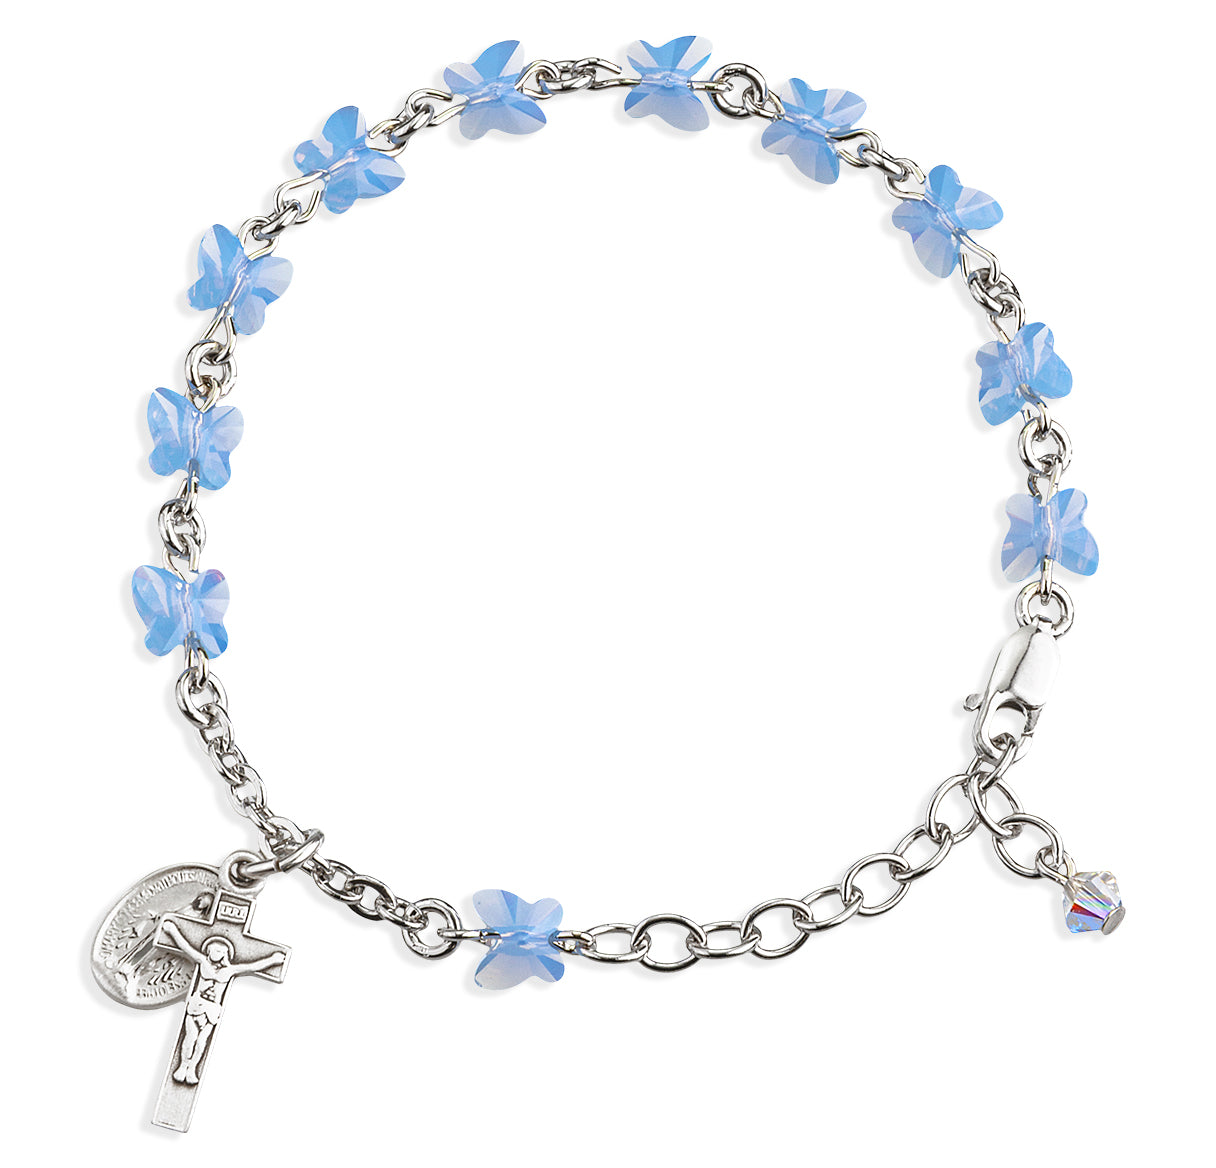 Sterling Silver Rosary Bracelet Created with 6mm Blue Opal Swarovski Crystal Butterfly Beads by HMH